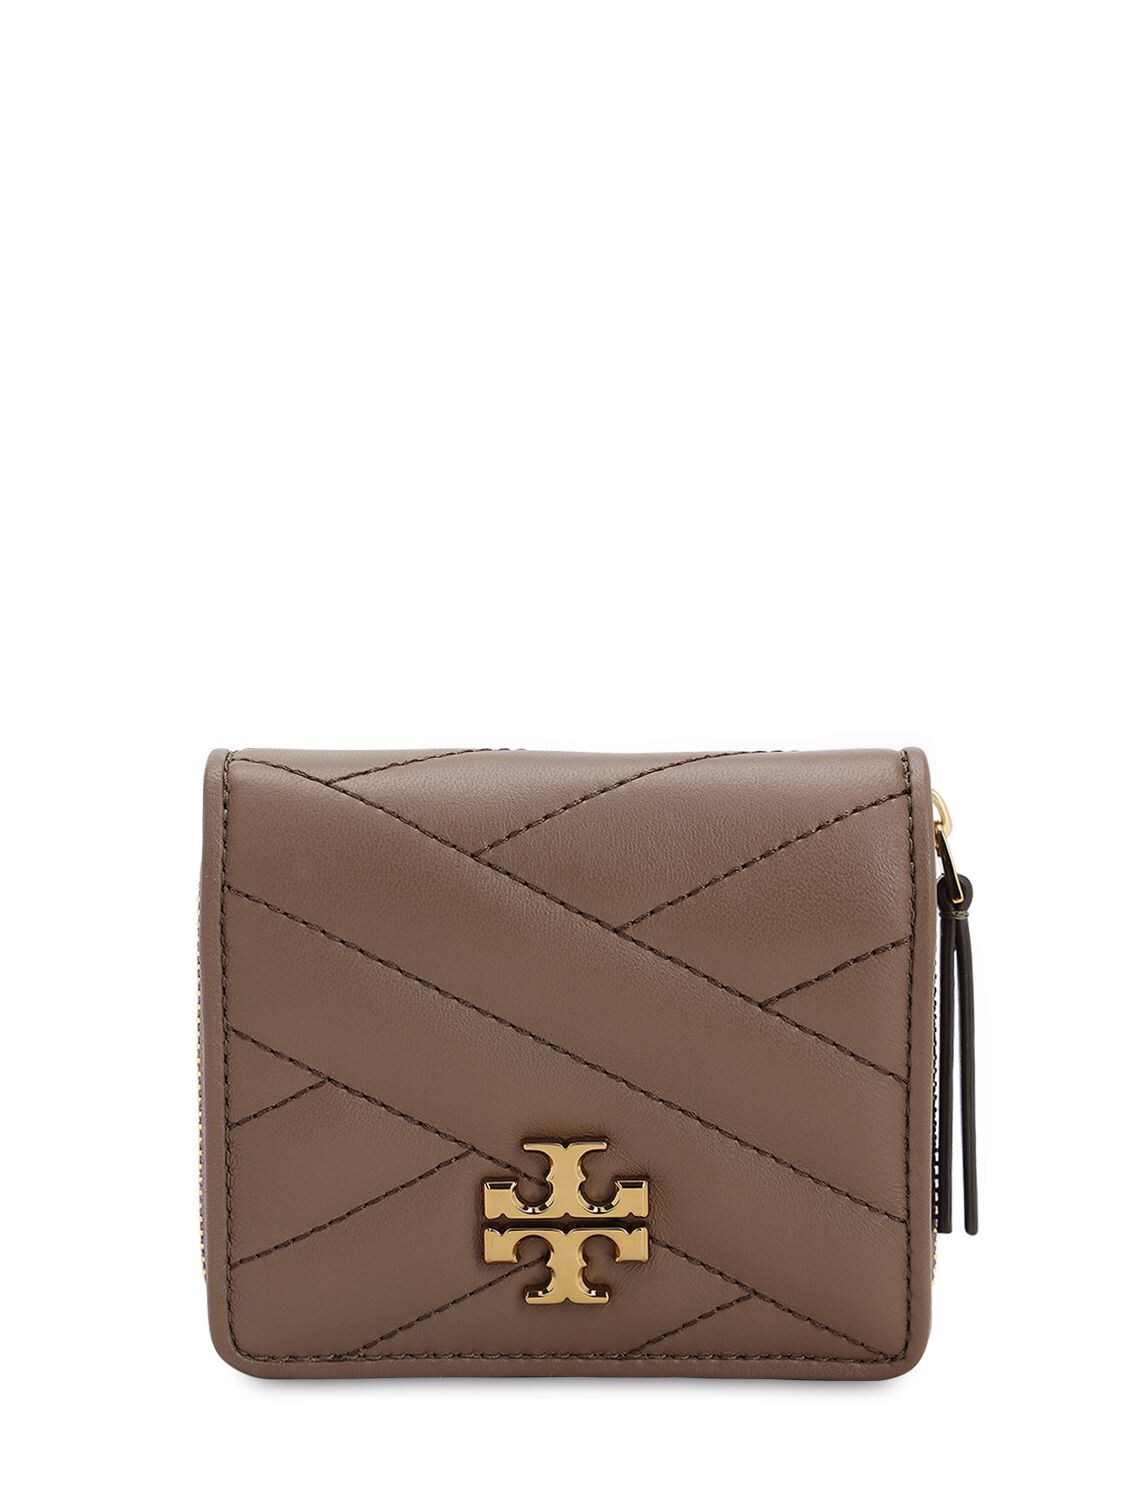 TORY BURCH KIRA QUILTED LEATHER COMPACT WALLET,71IL4W030-MJK00